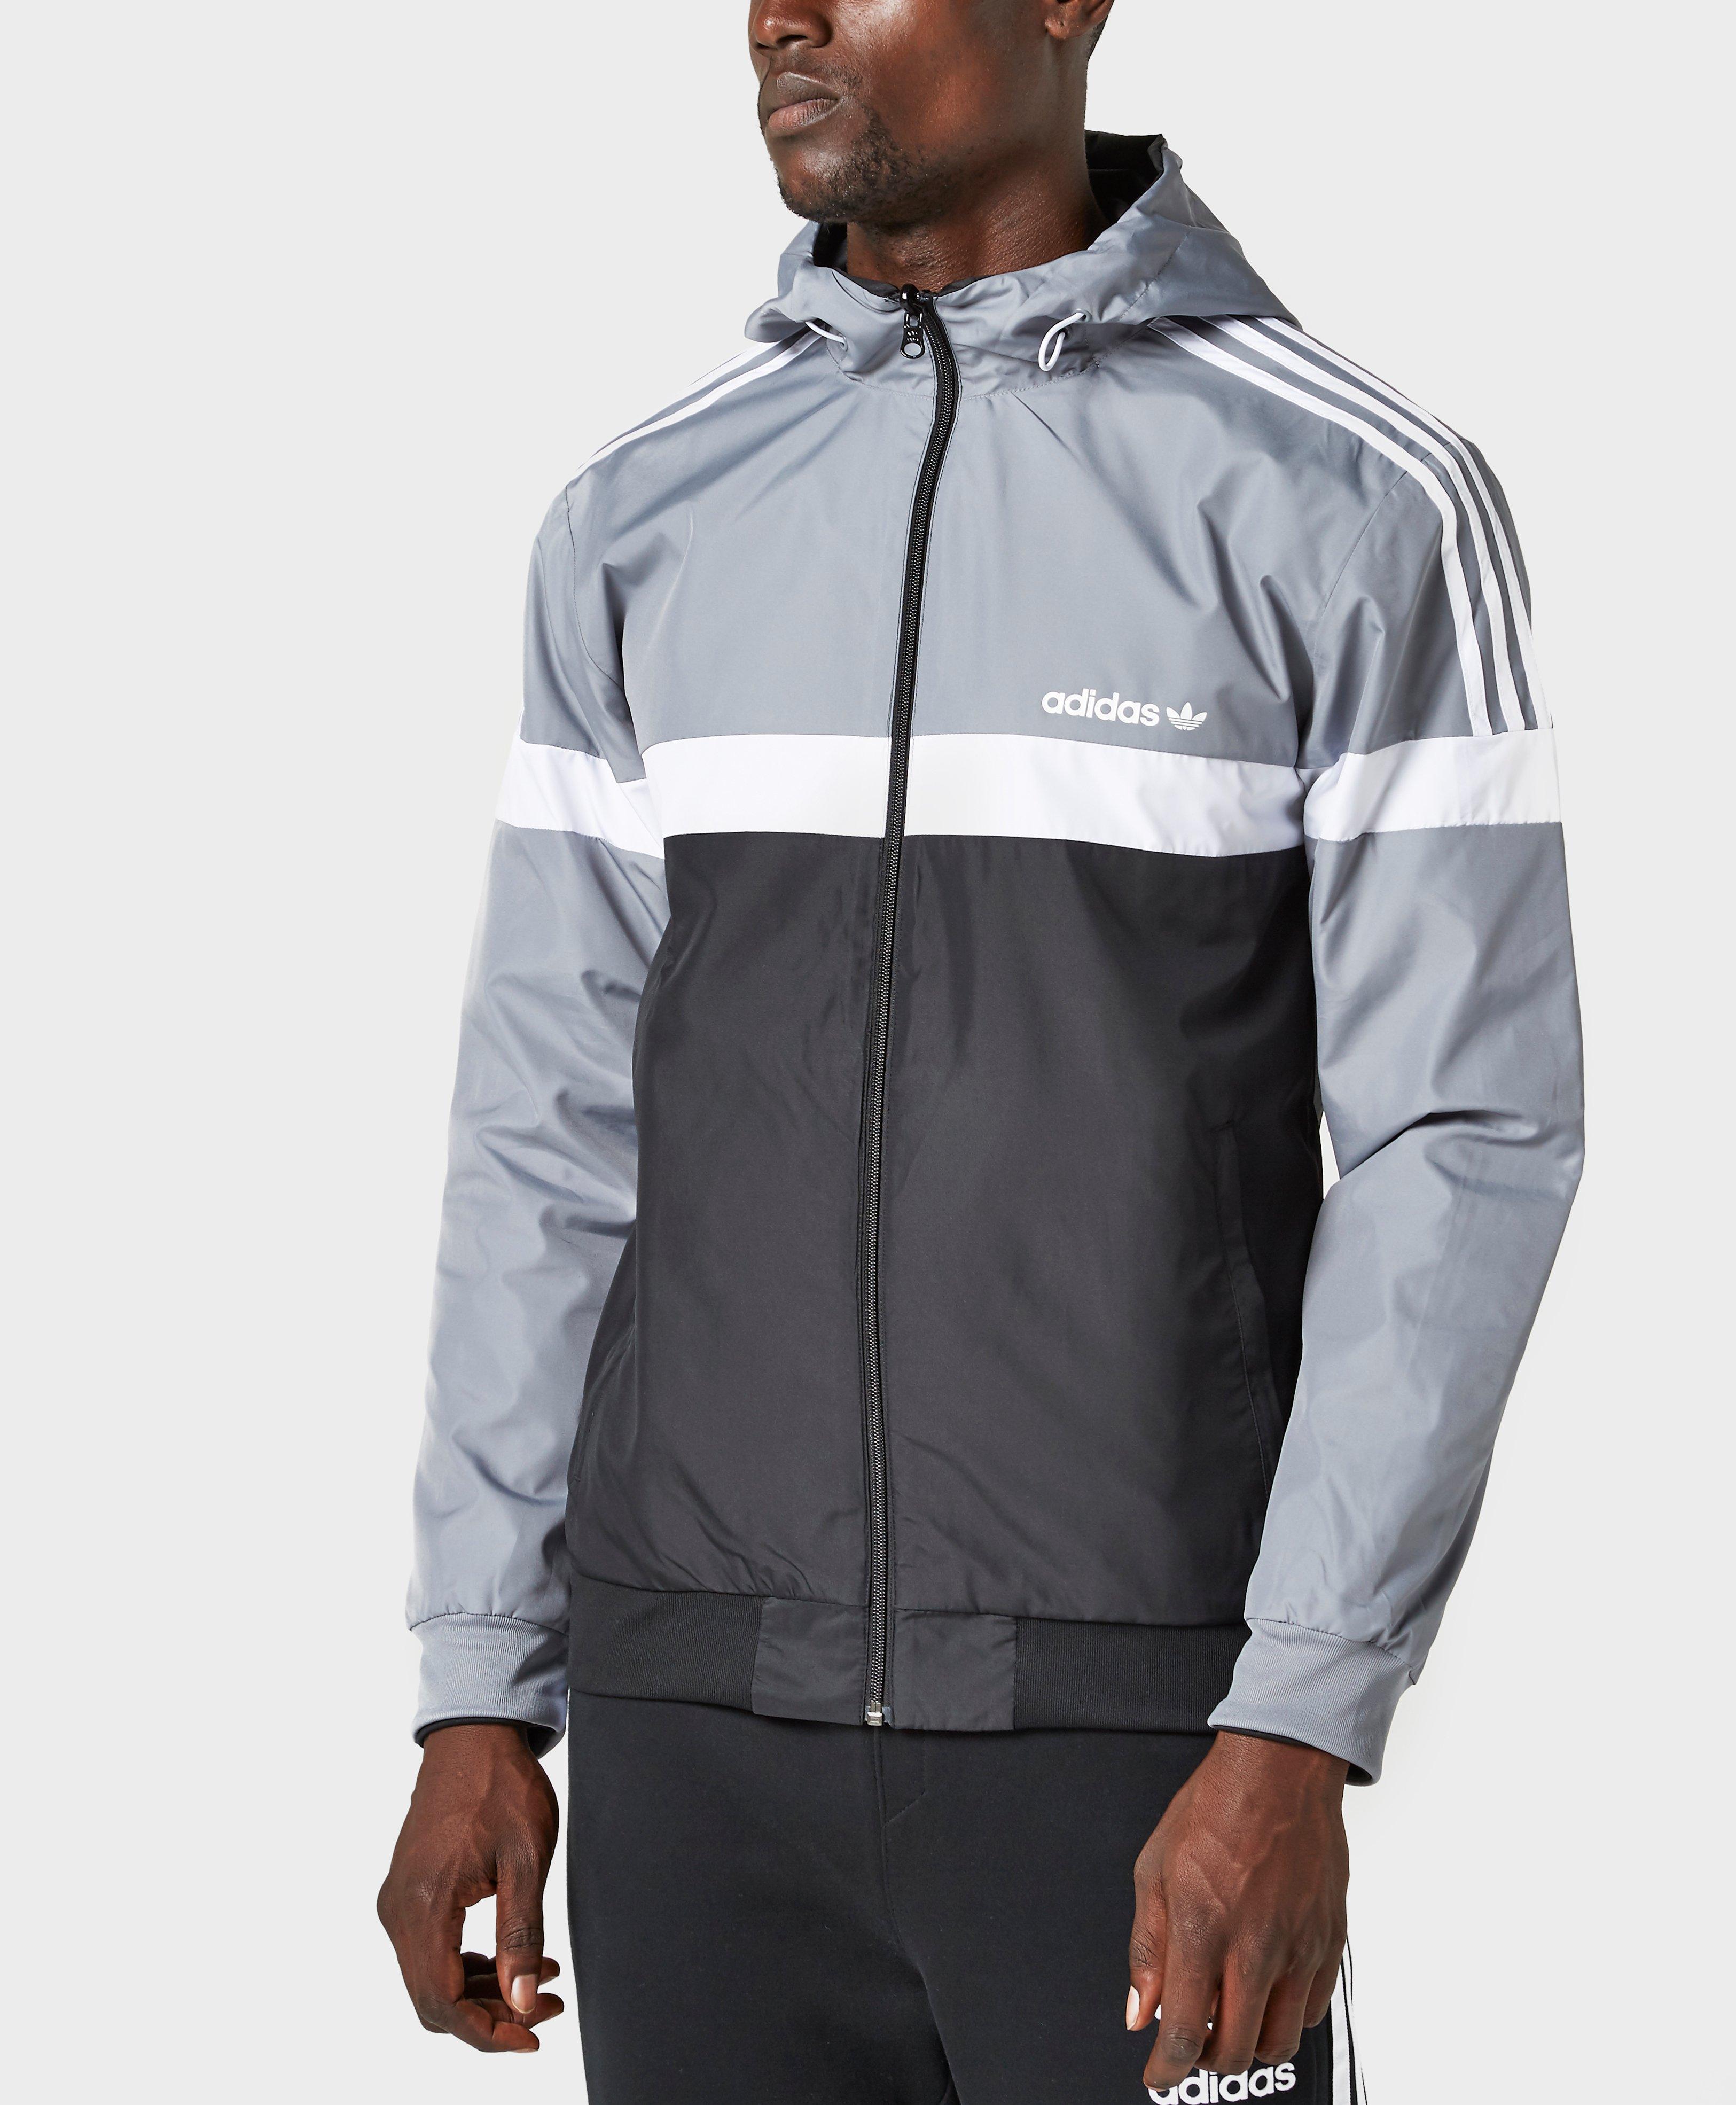 adidas Originals Synthetic Itasca Jacket for Men - Lyst